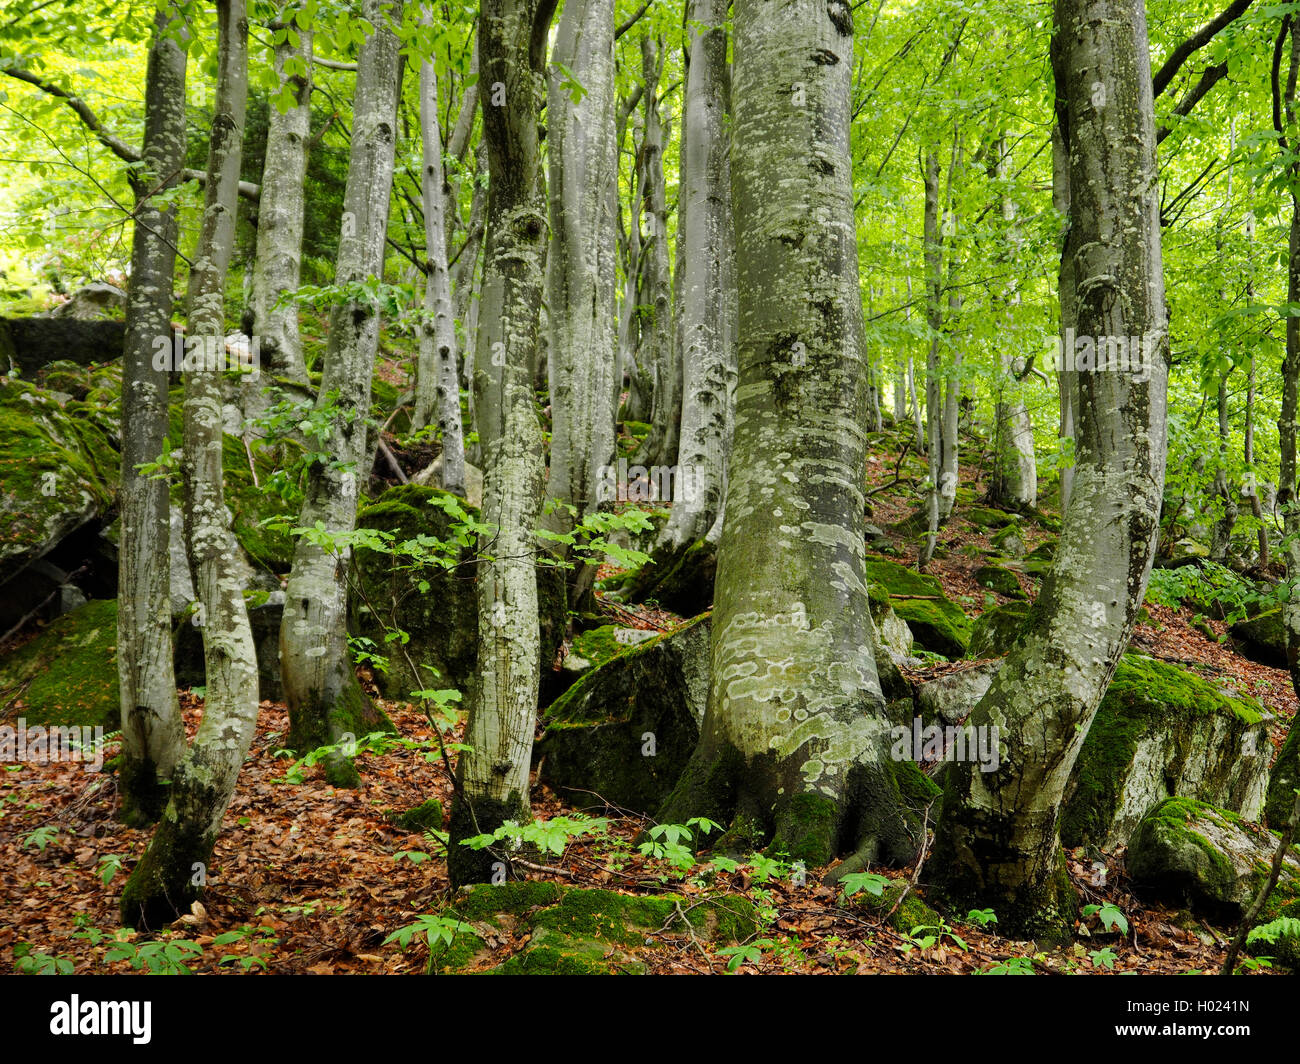 common beech (Fagus sylvatica), beech forest in the Maritime Alps in spring, Italy, Parco Naturale Alpi Marittime, Valdieri Stock Photo